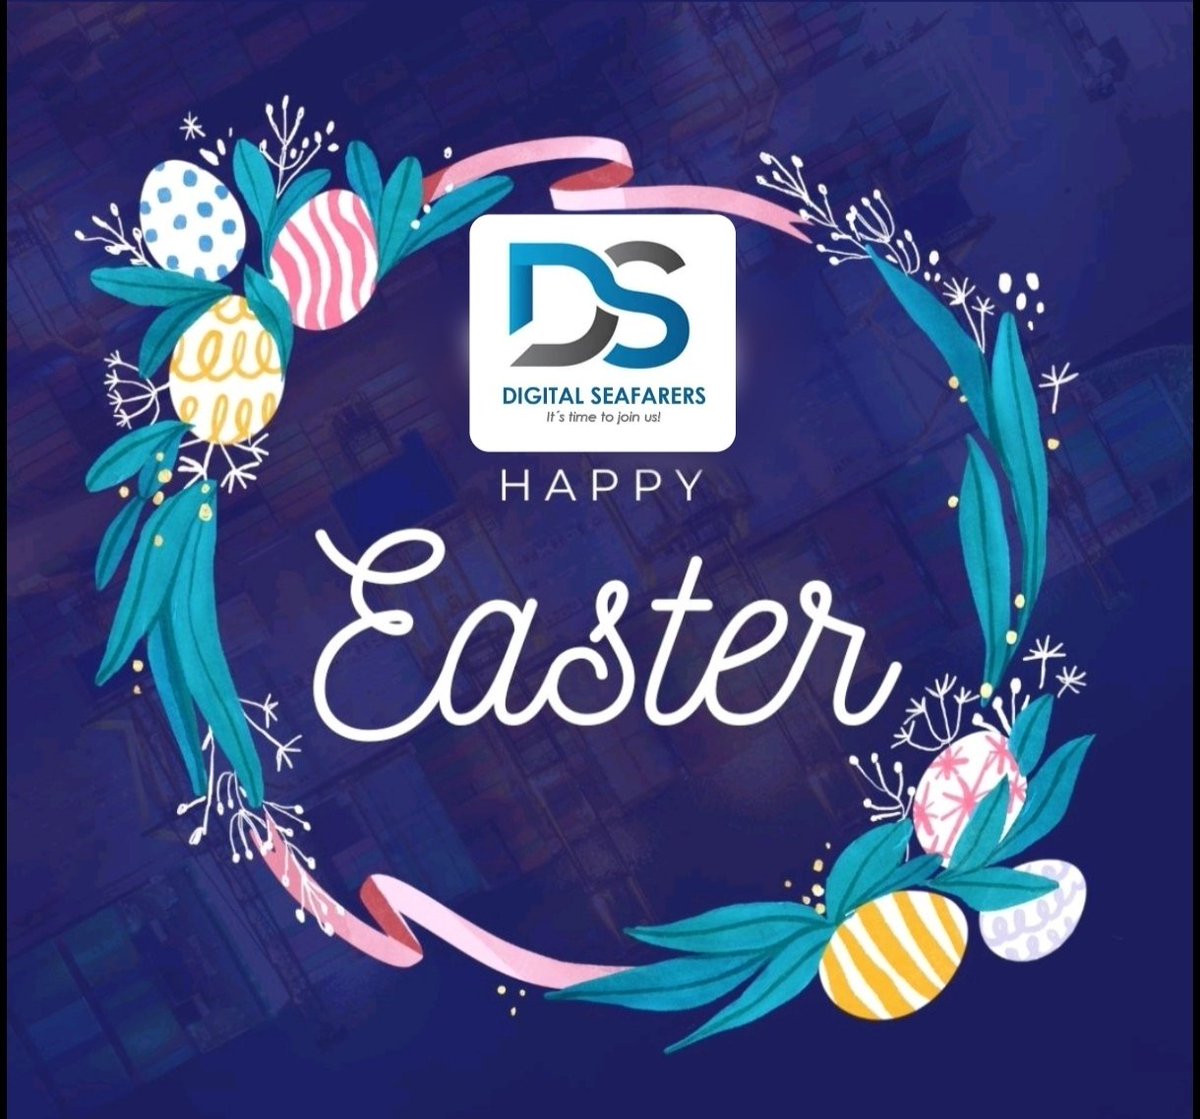 Happy Easter to all our hardworking seafarers and maritime professionals! Wishing you a day filled with joy, peace, and safe voyages ahead. 🚢🐰 #Easter2024 #MaritimeCommunity